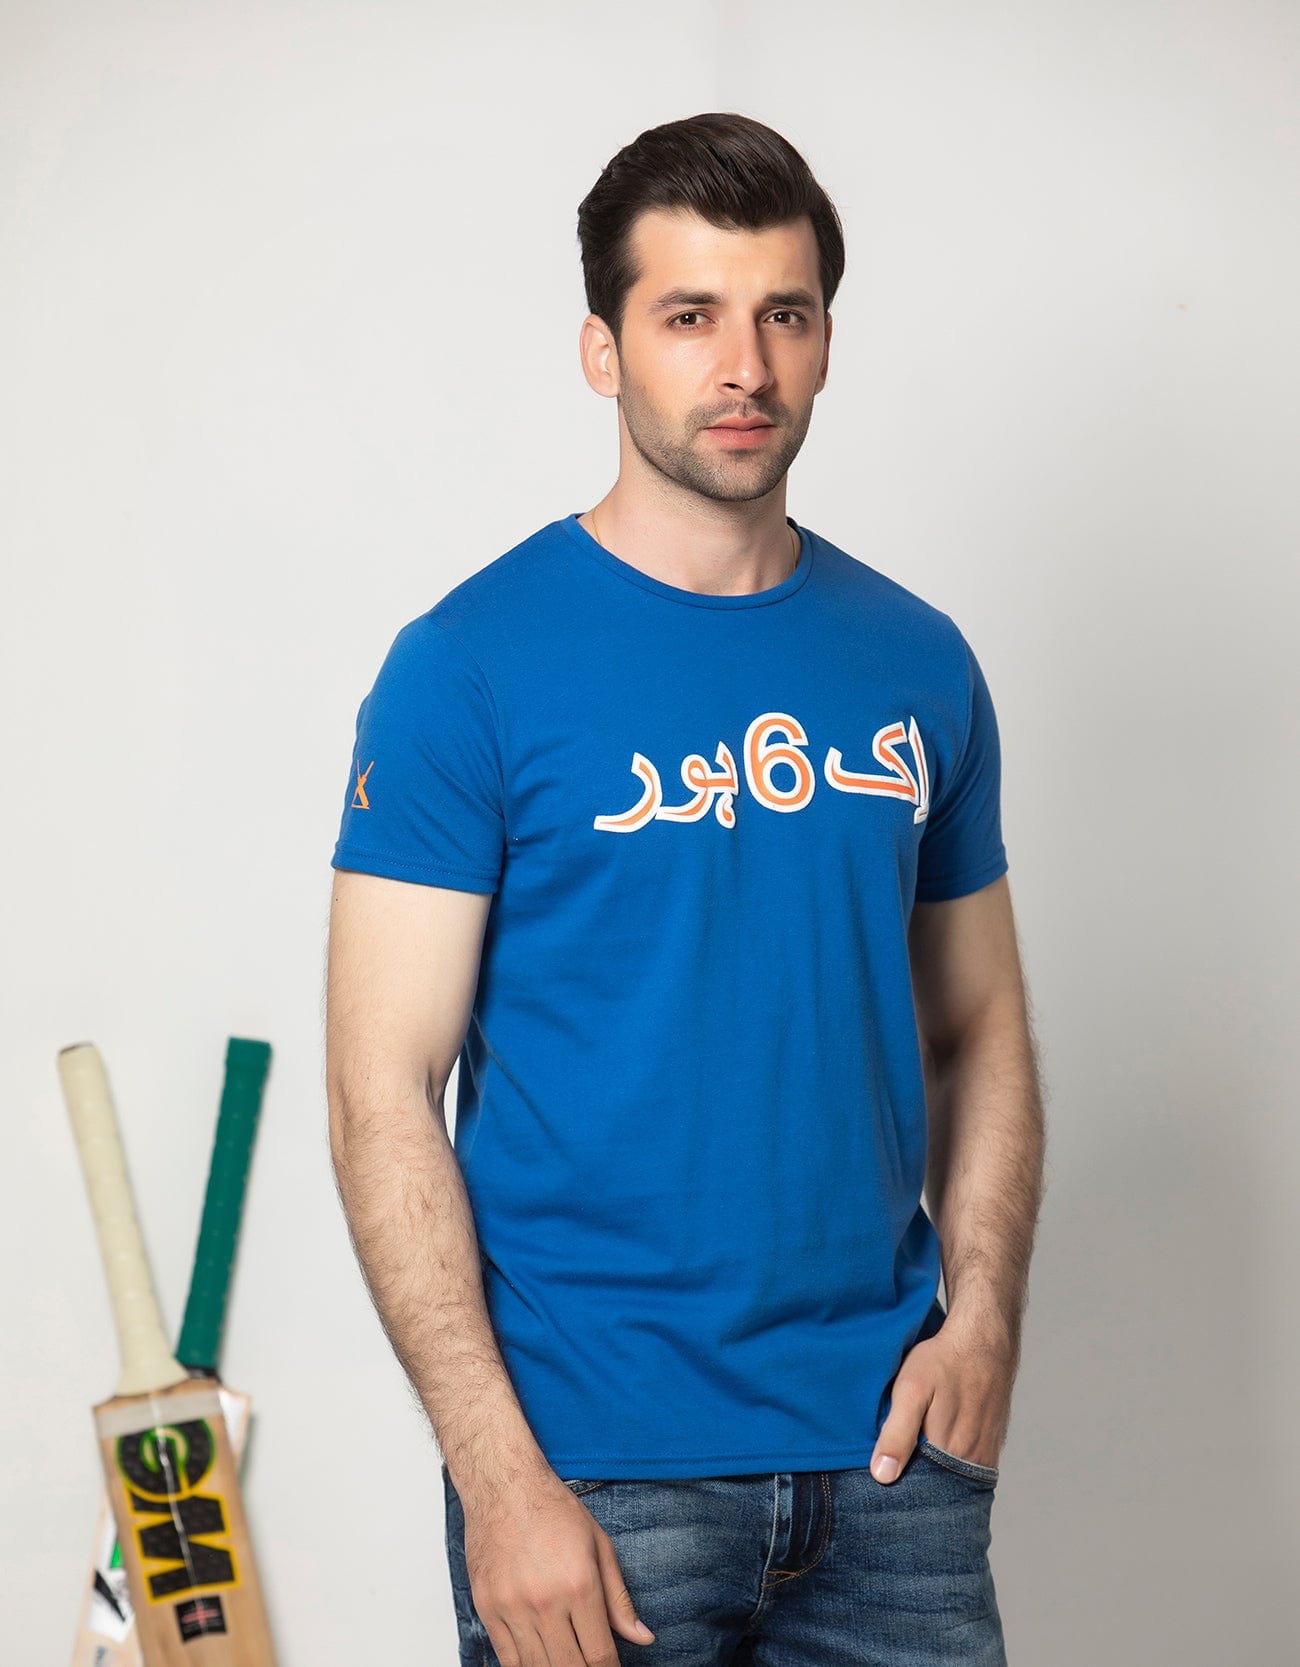 T-SHIRT - Blue T-SHIRTS HMKTS20036 - HOPE NOT OUT by Shahid Afridi